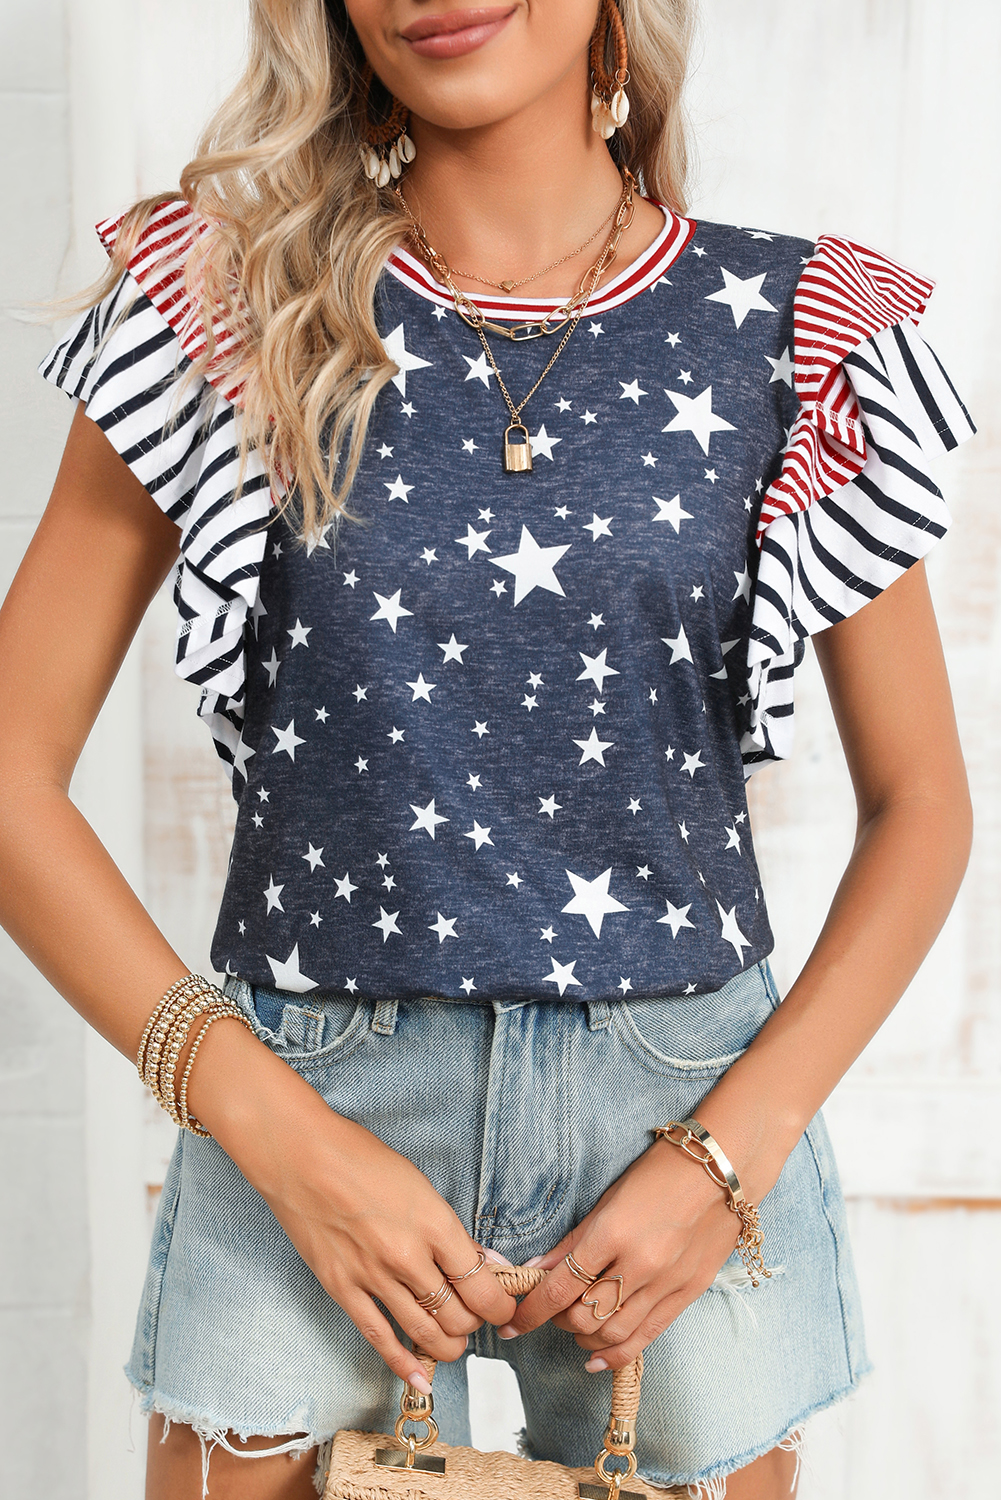 Shewin Wholesale Clothes Gray Striped Ruffled Sleeve Star Print T SHIRT